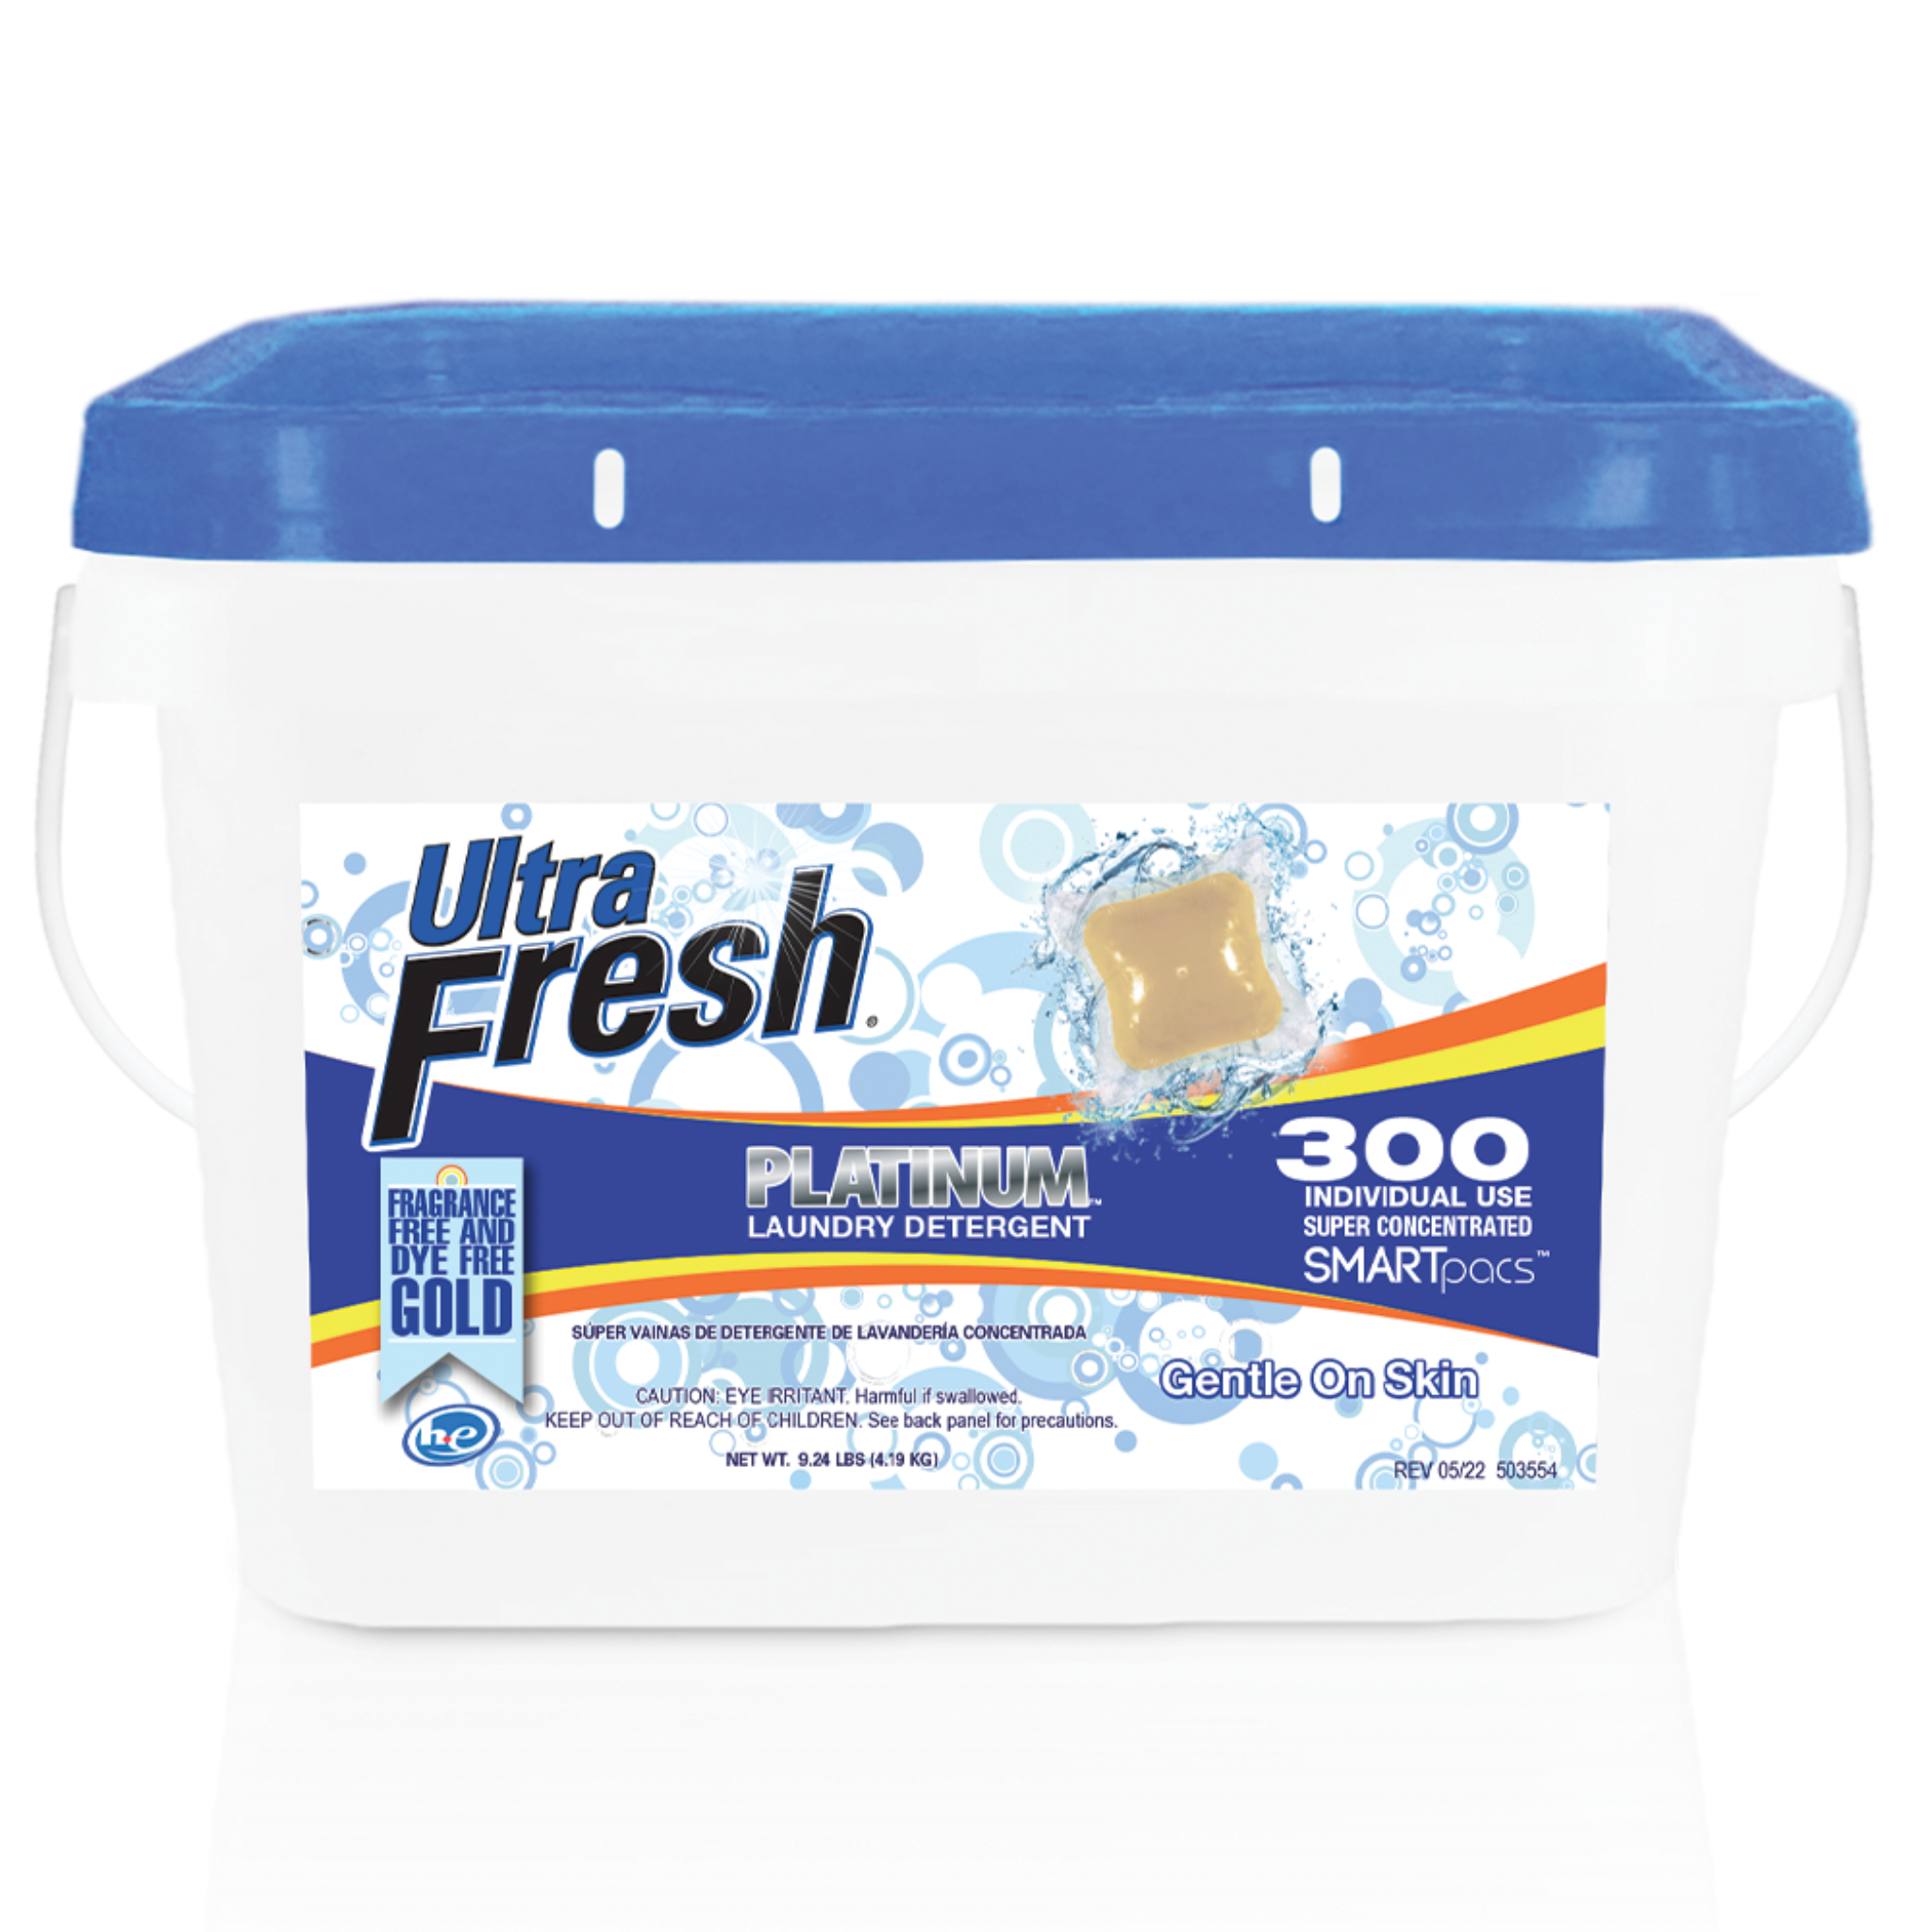 Ultra Fresh Platinum Free & Clear Laundry Pods - 300 Count